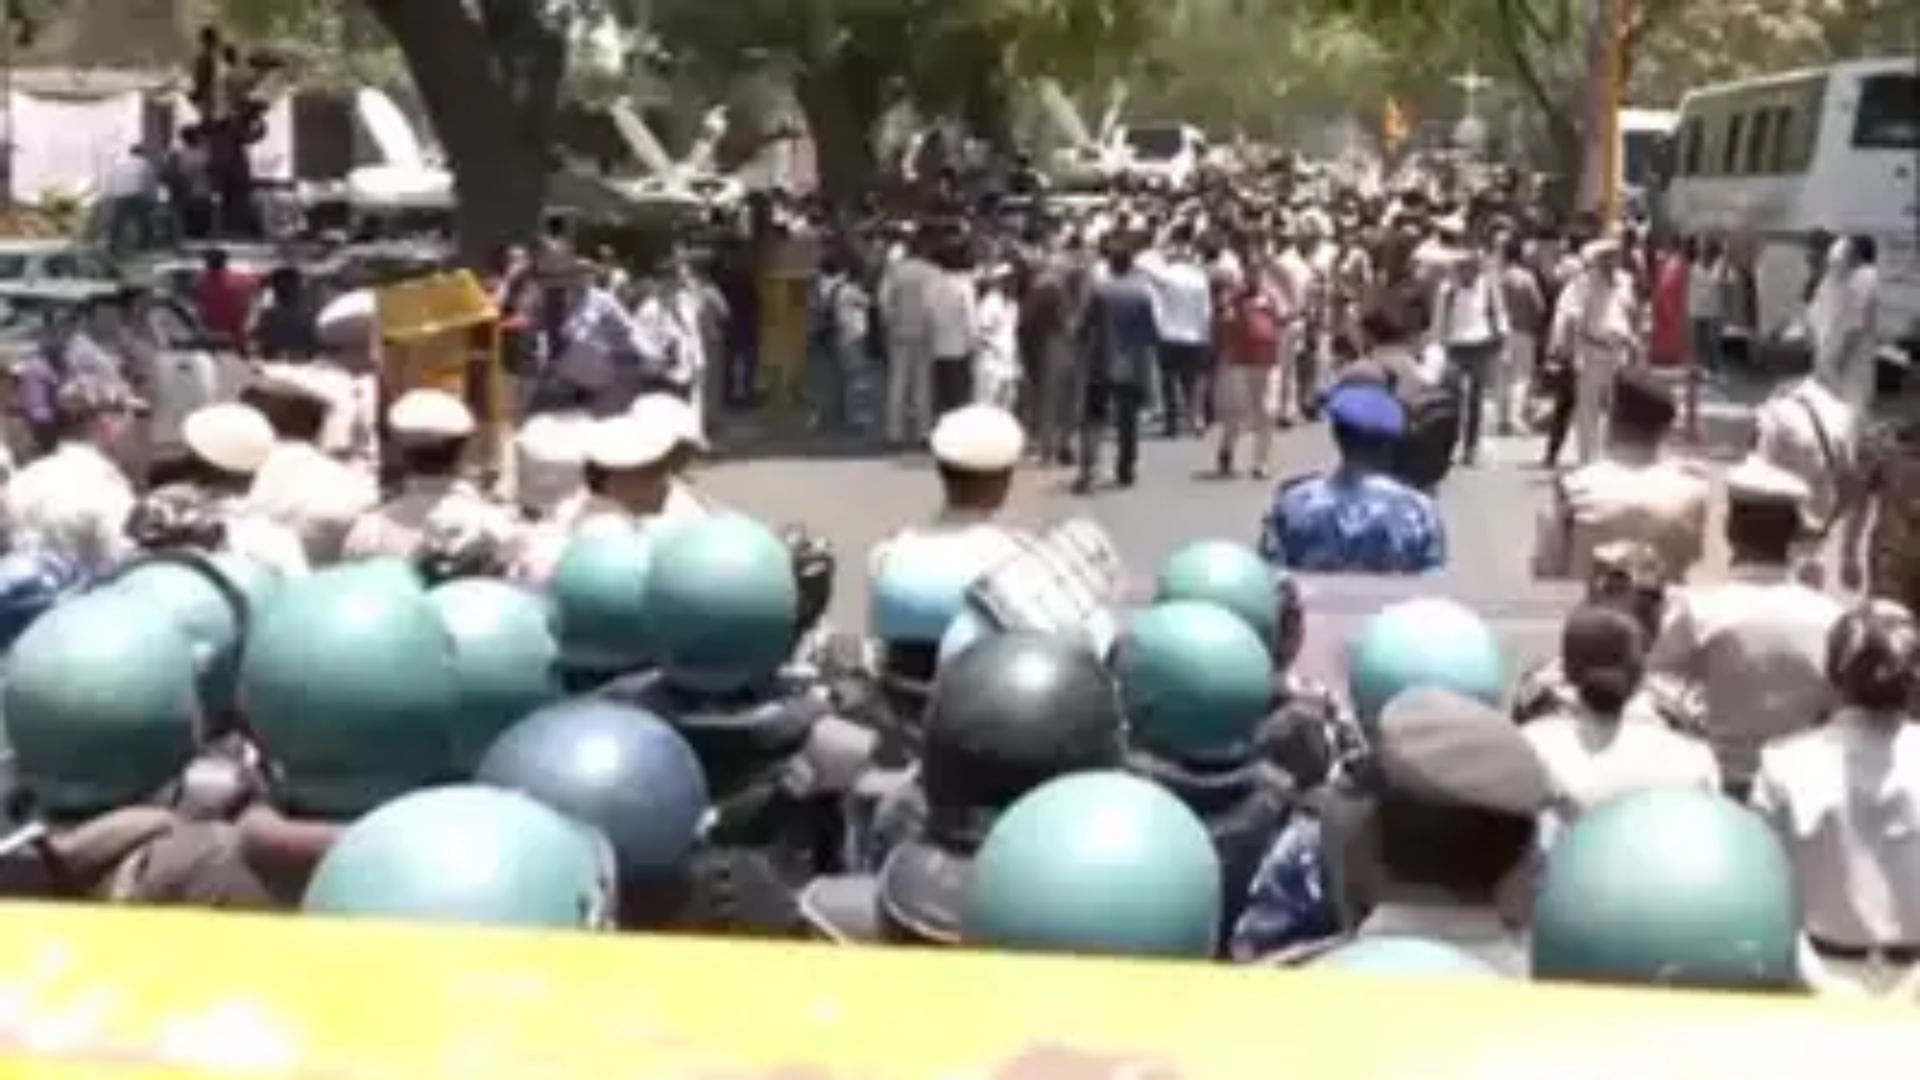 AAP Protest in Delhi: Police Detain Workers Marching to BJP HQ, Section 144 Enforced on DDU Marg